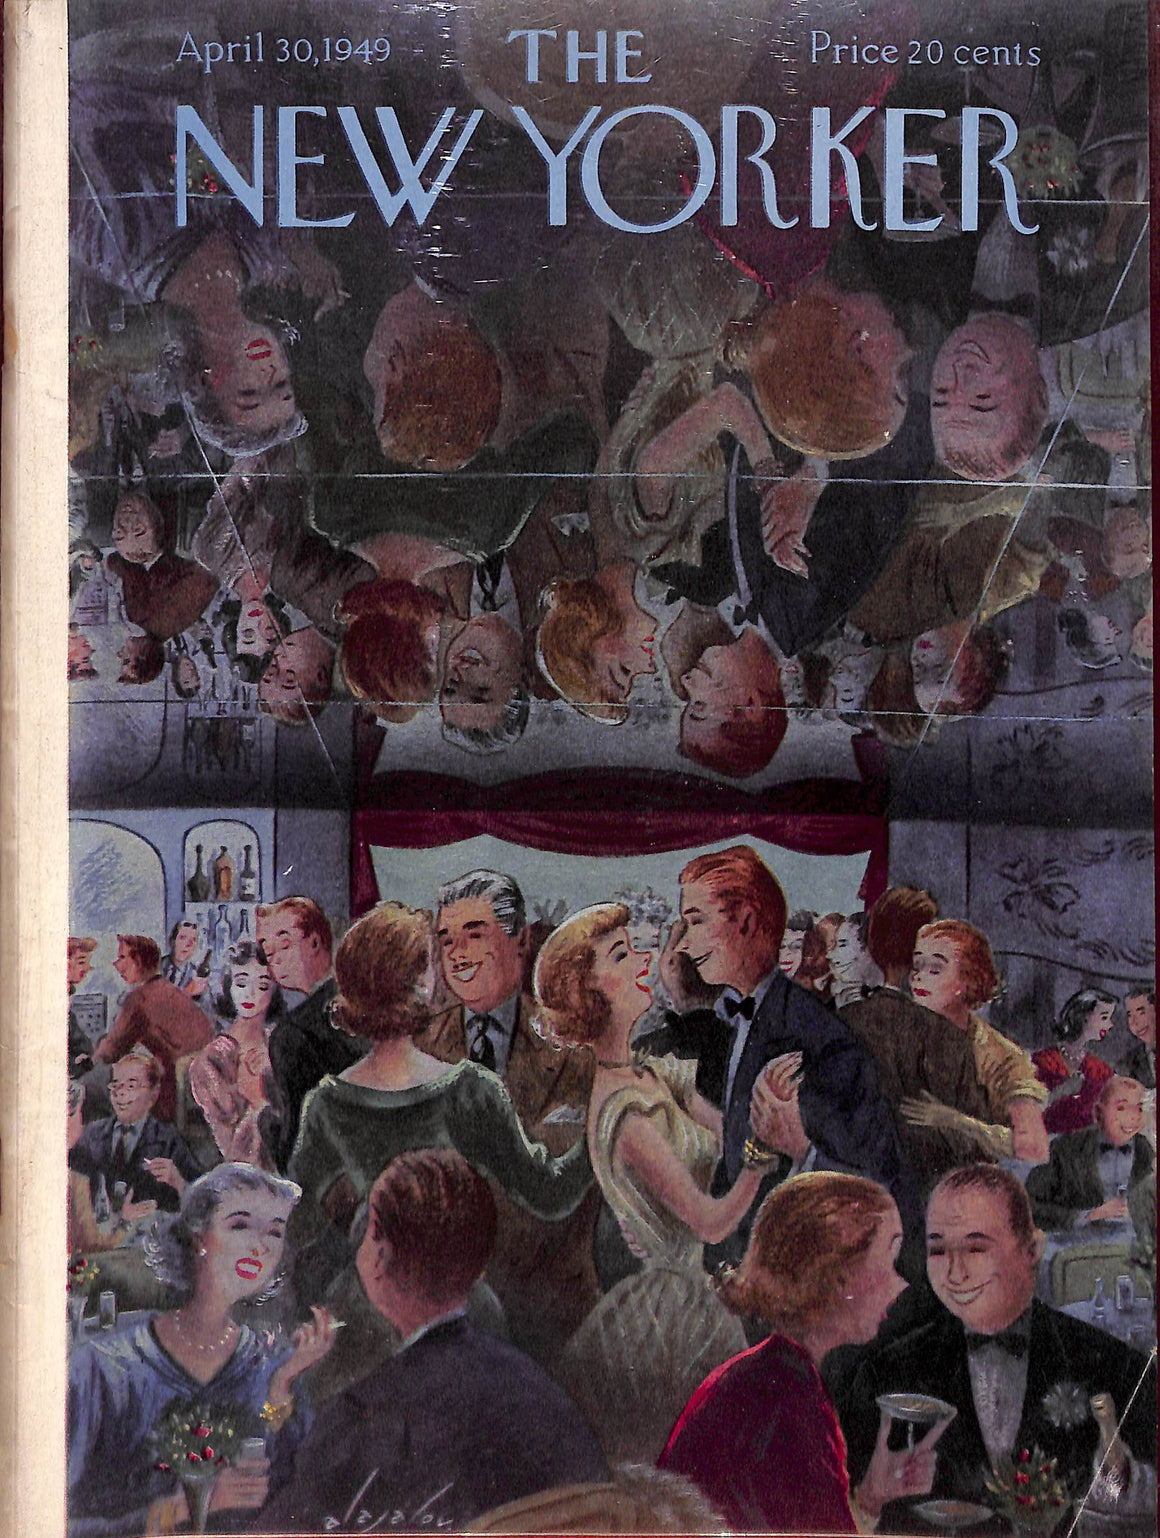 The New Yorker April 30, 1949